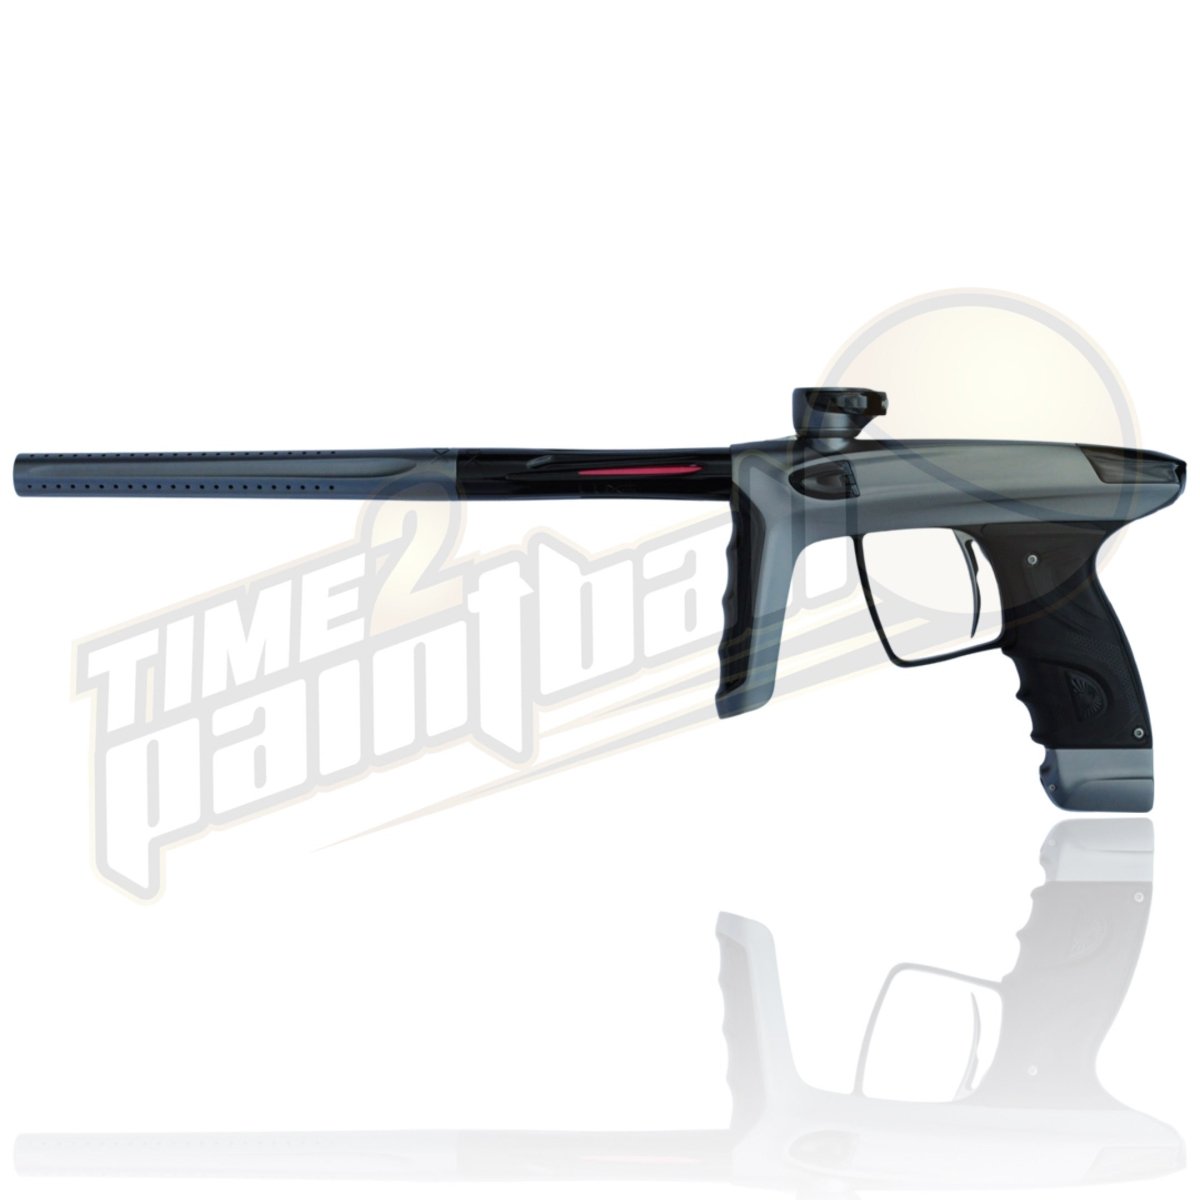 DLX LUXE TM40 - Time 2 Paintball